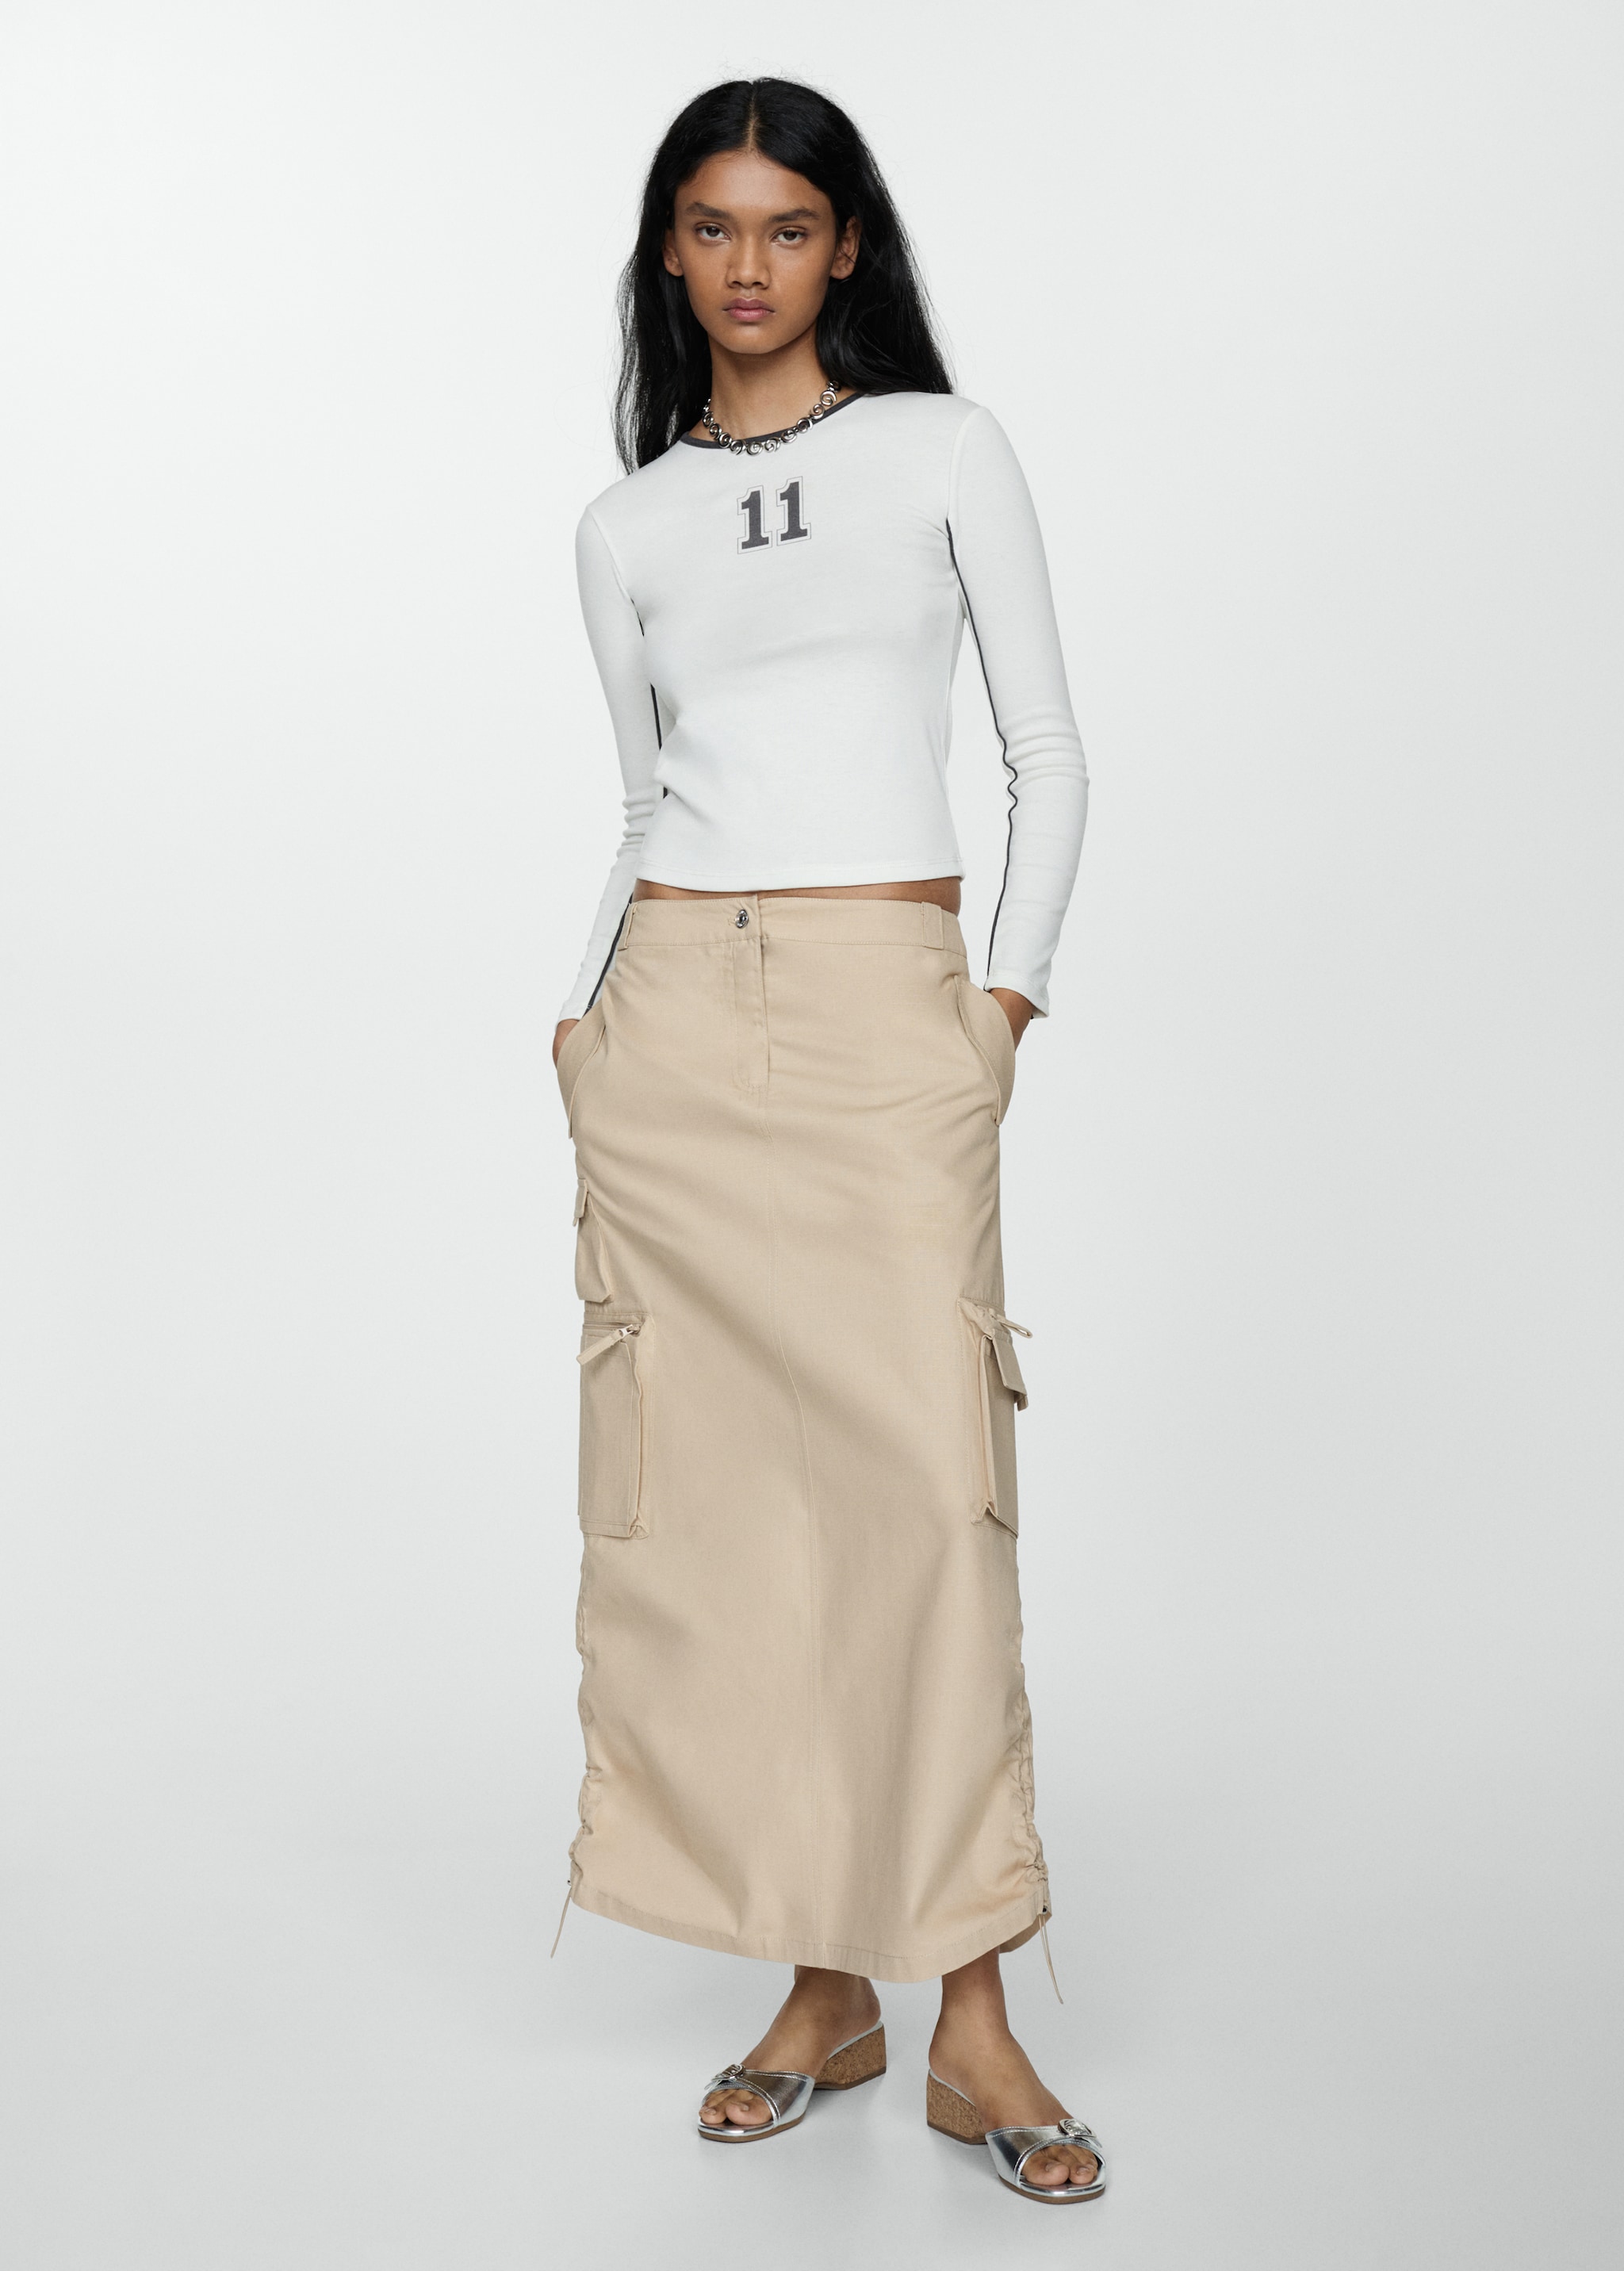 Parachute skirt with cargo pockets - General plane